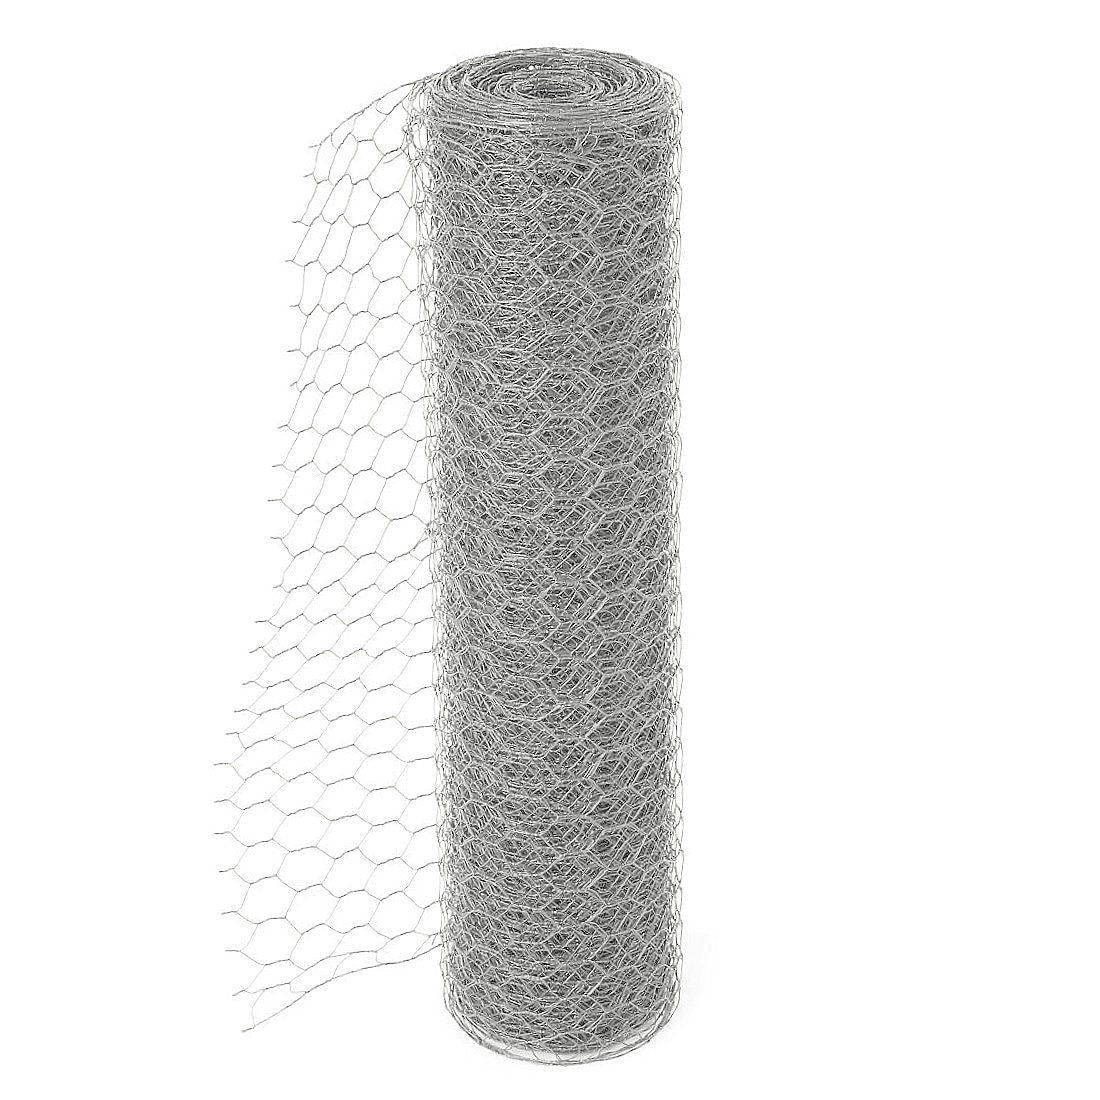 Galvanised Hexagonal Wire Netting - Various Sizes Available